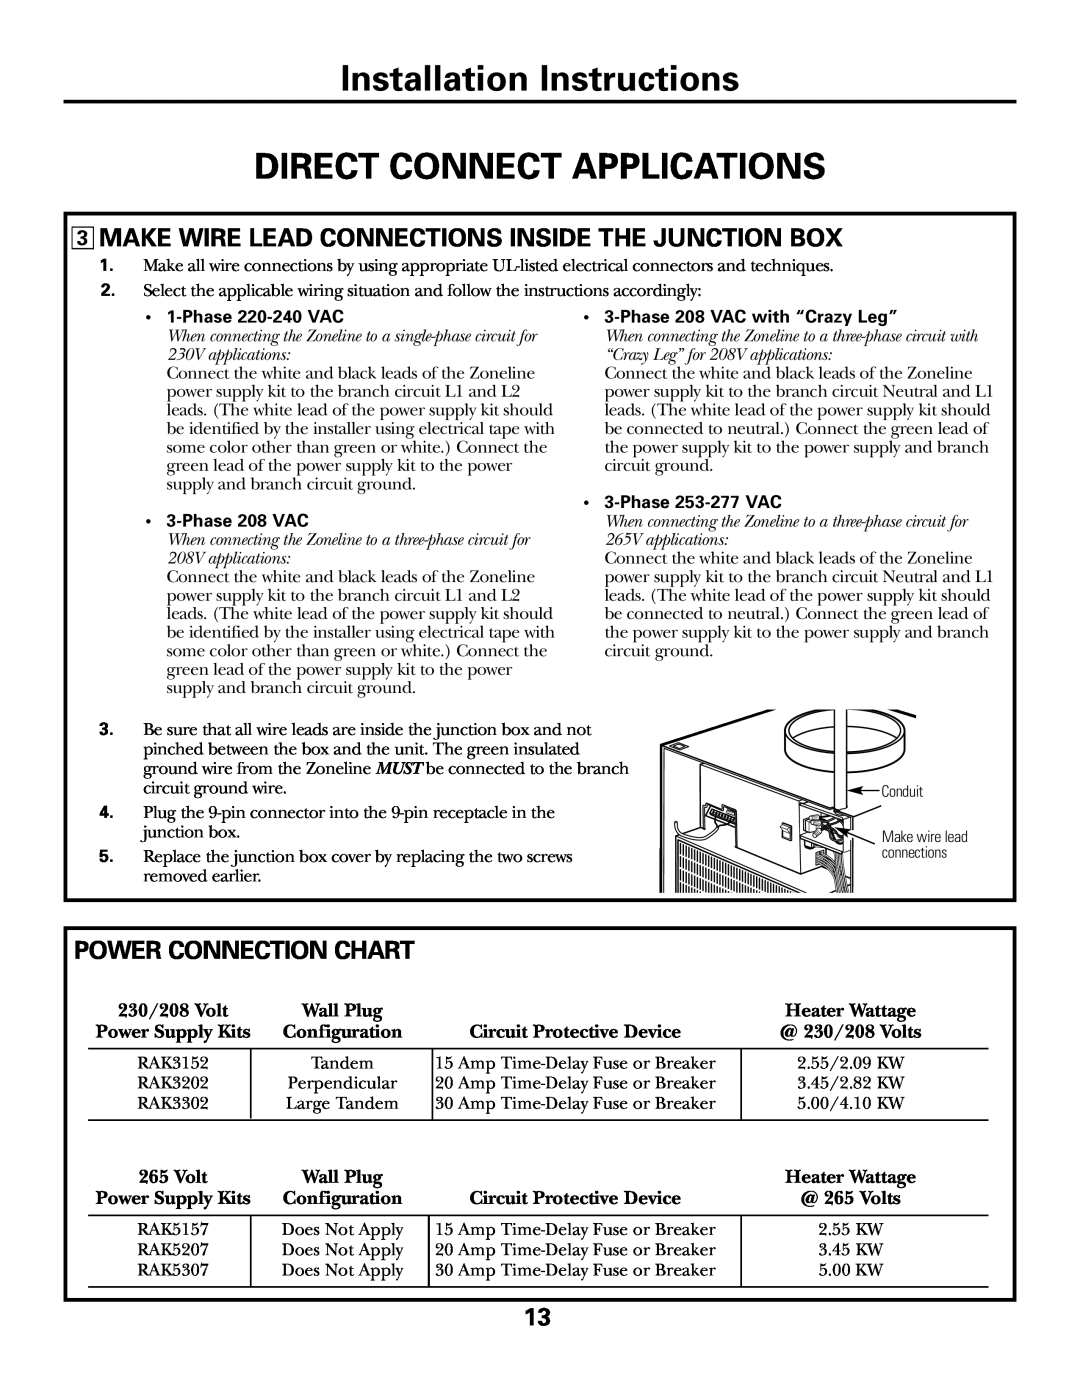 GE 49-7419-2 Power Connection Chart, Configuration, Installation Instructions, Direct Connect Applications, Volt 